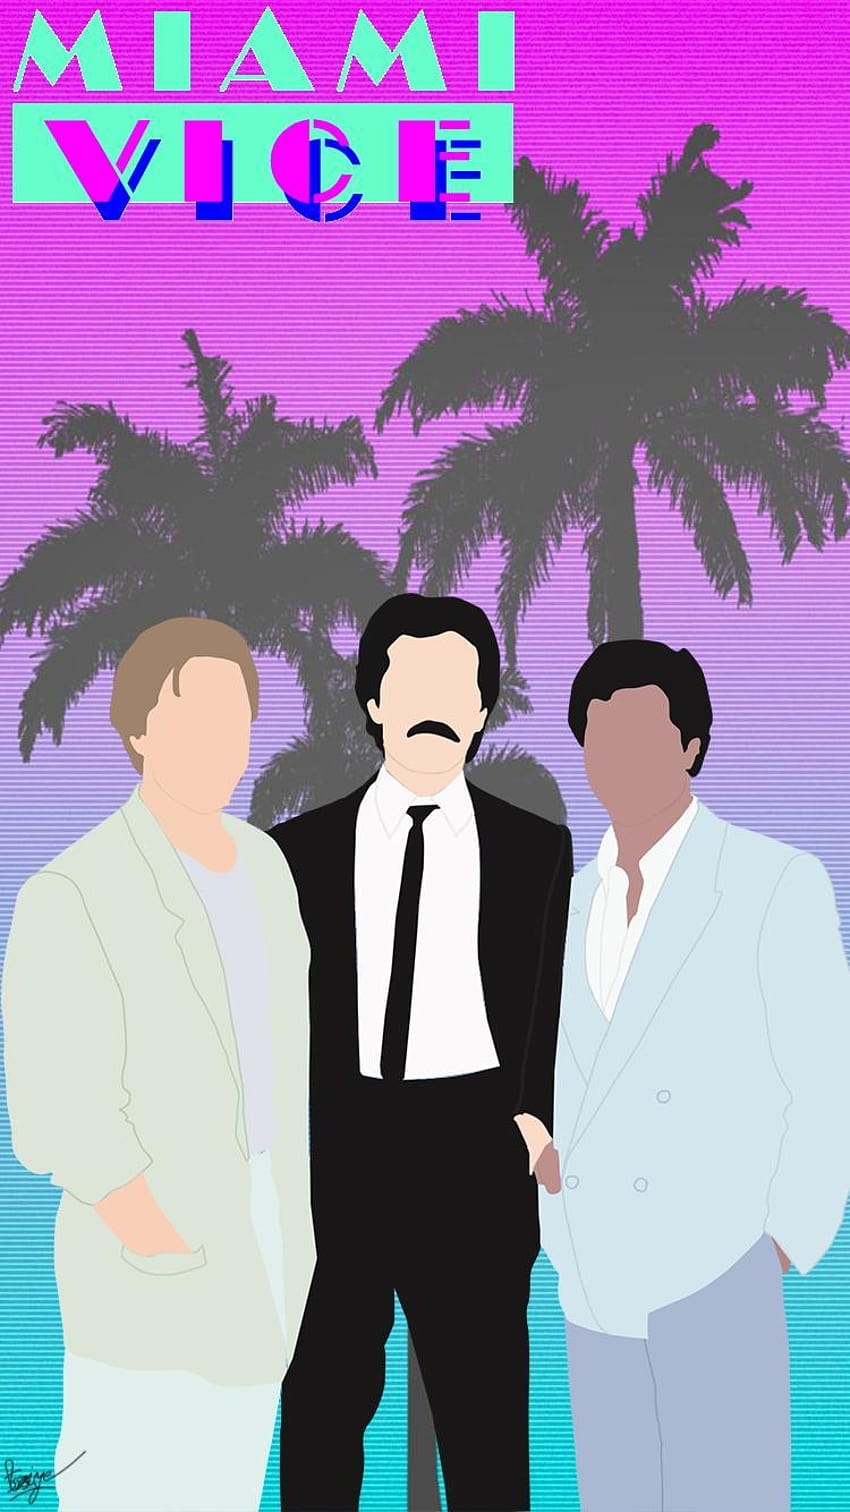 Made a Miami Vice for you phone users! : MiamiVice, miami vice android HD phone wallpaper